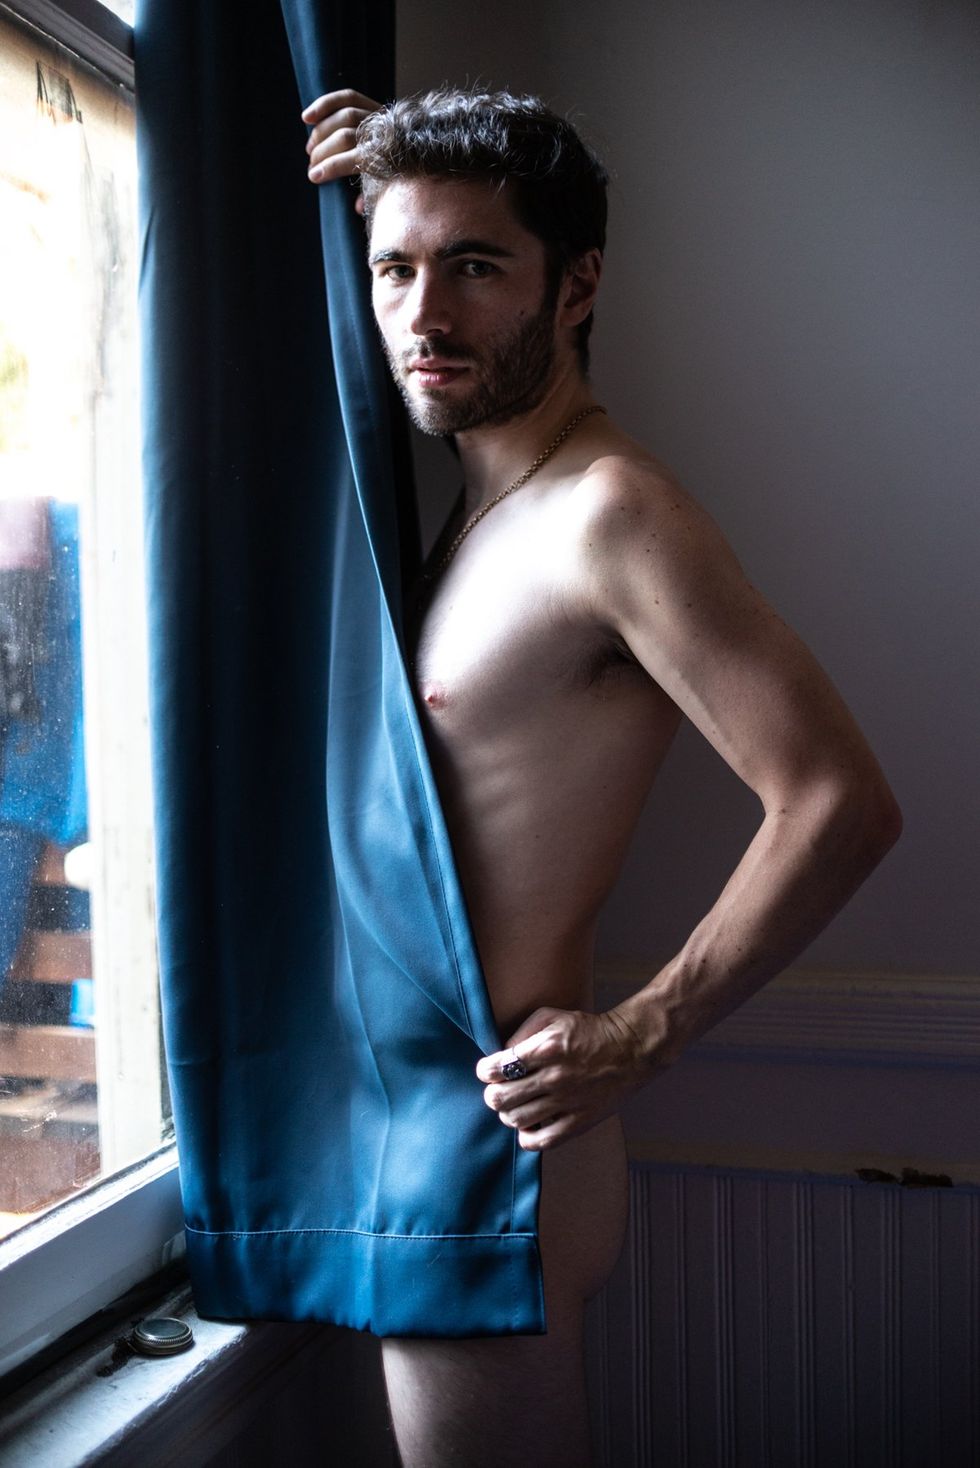 Man stands in front of window, naked but covered by curtain